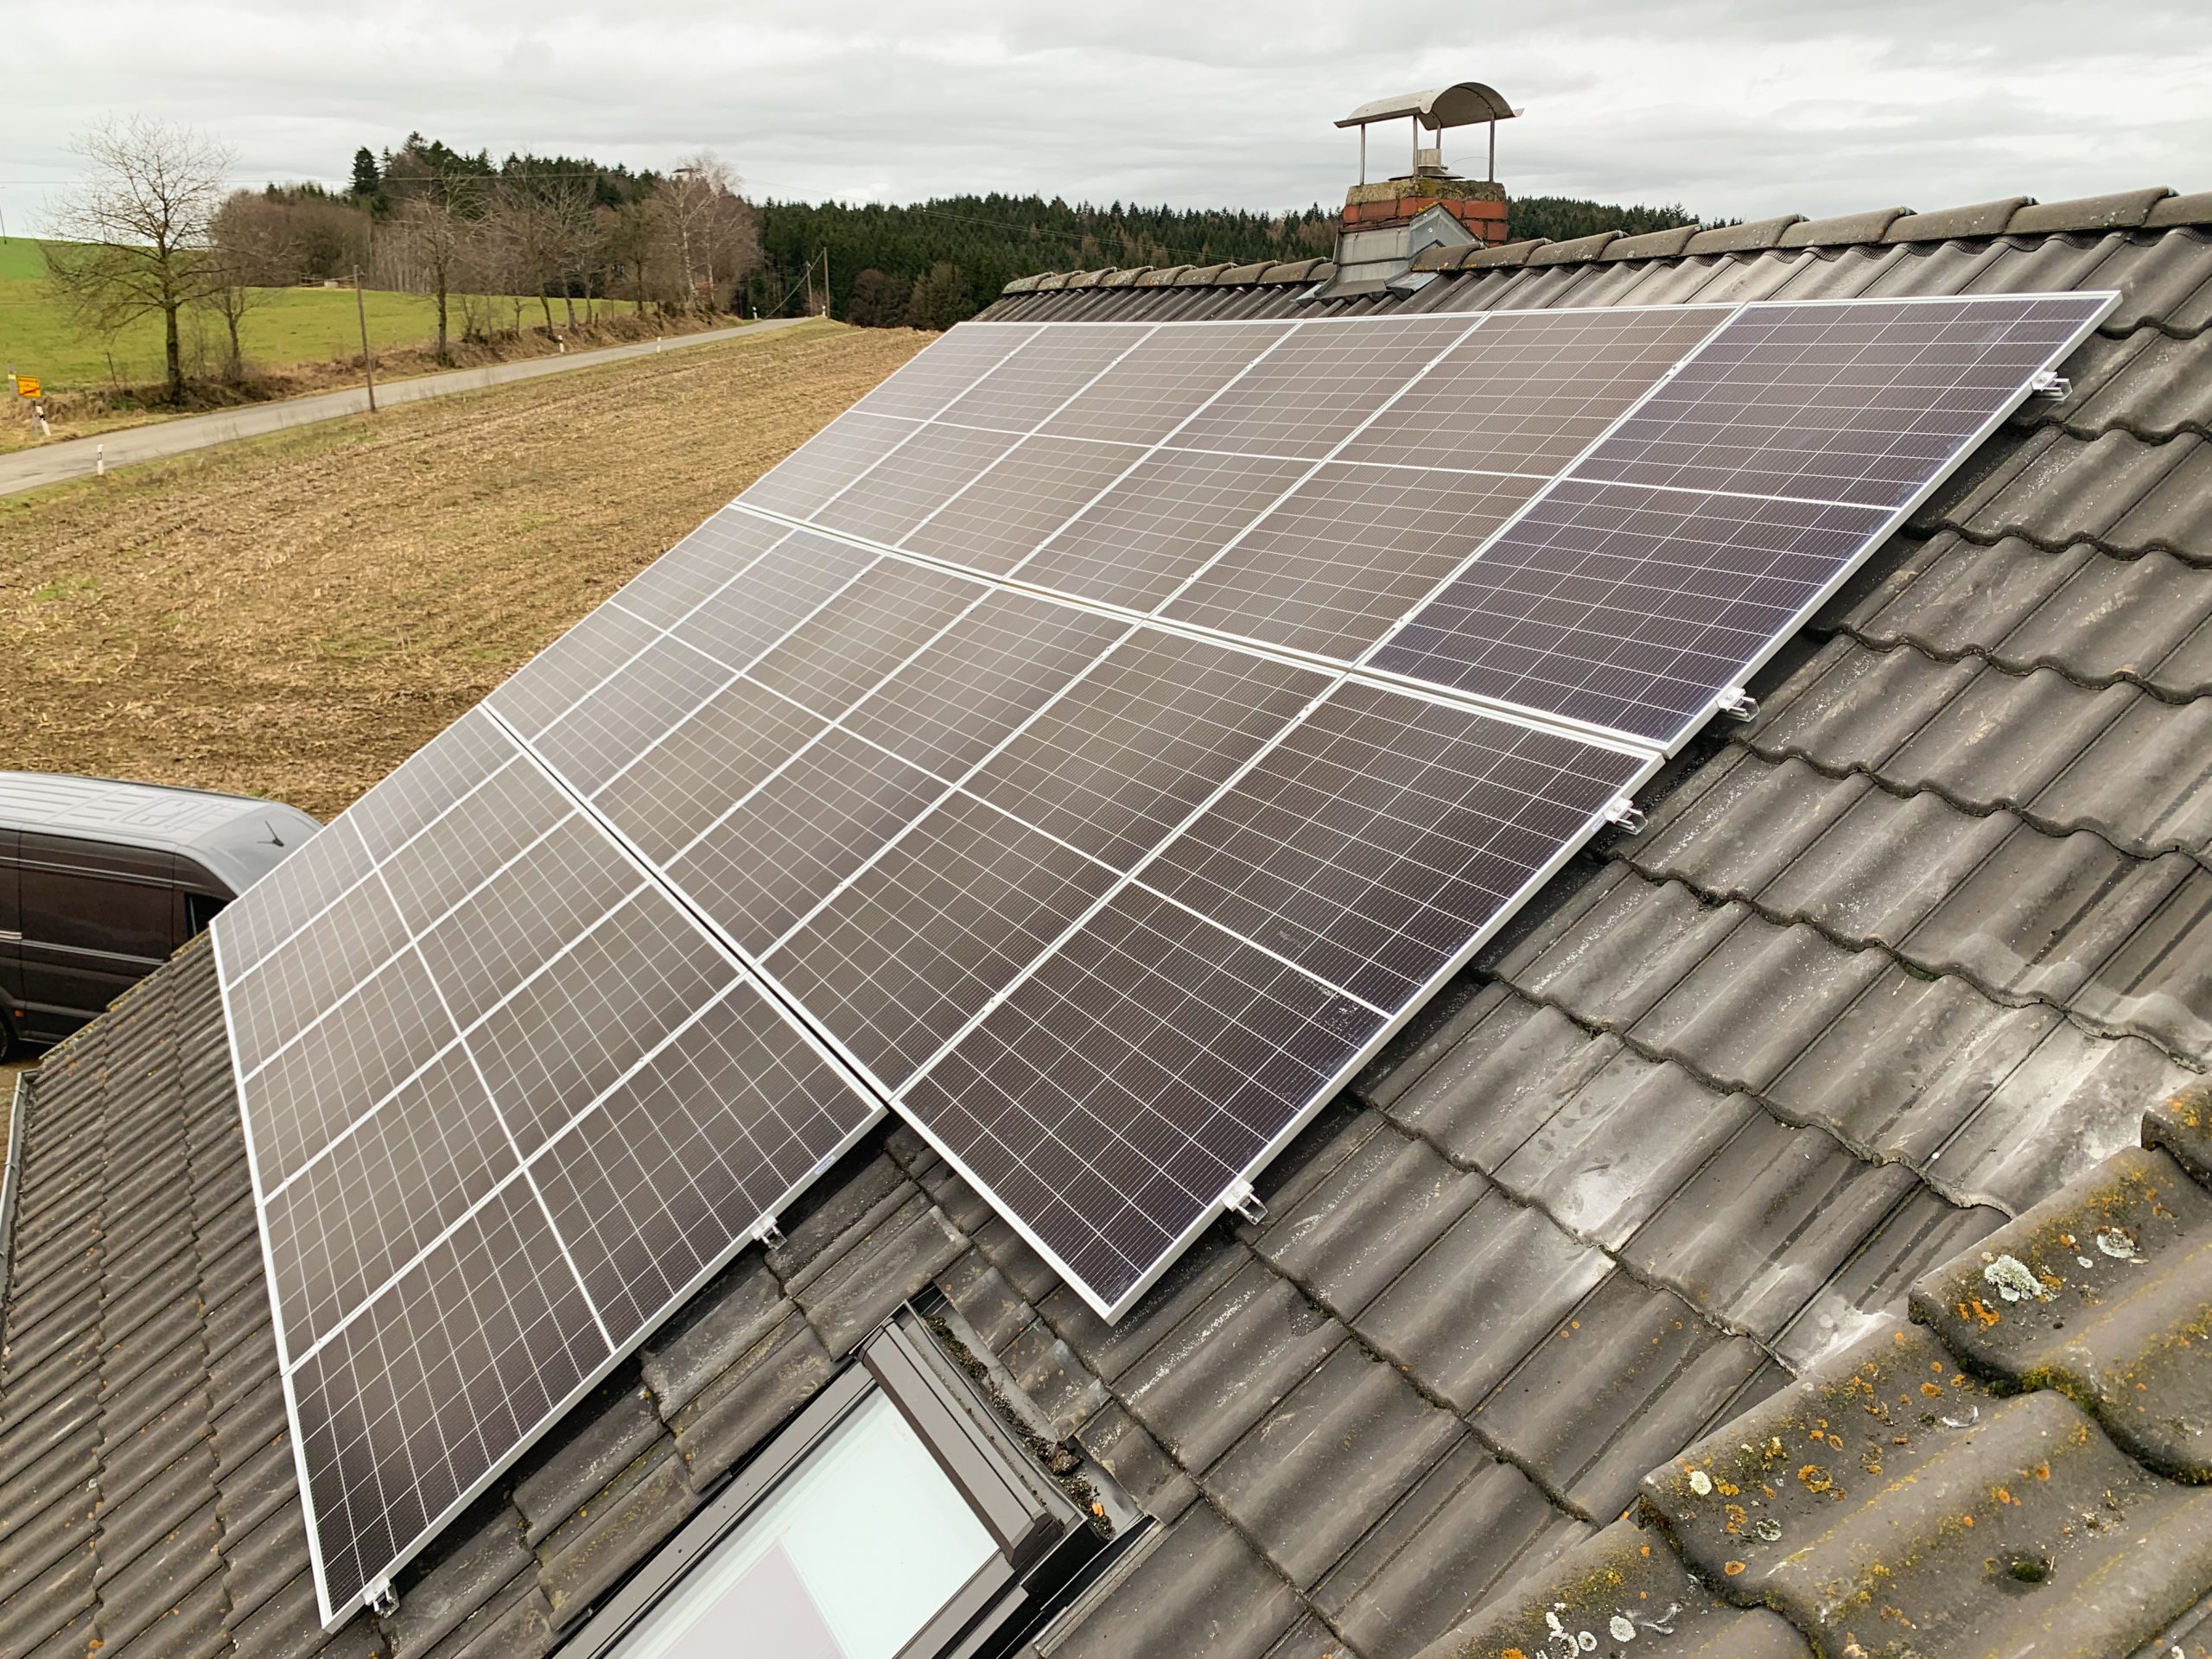 Solar modules installed on the roof of a private house